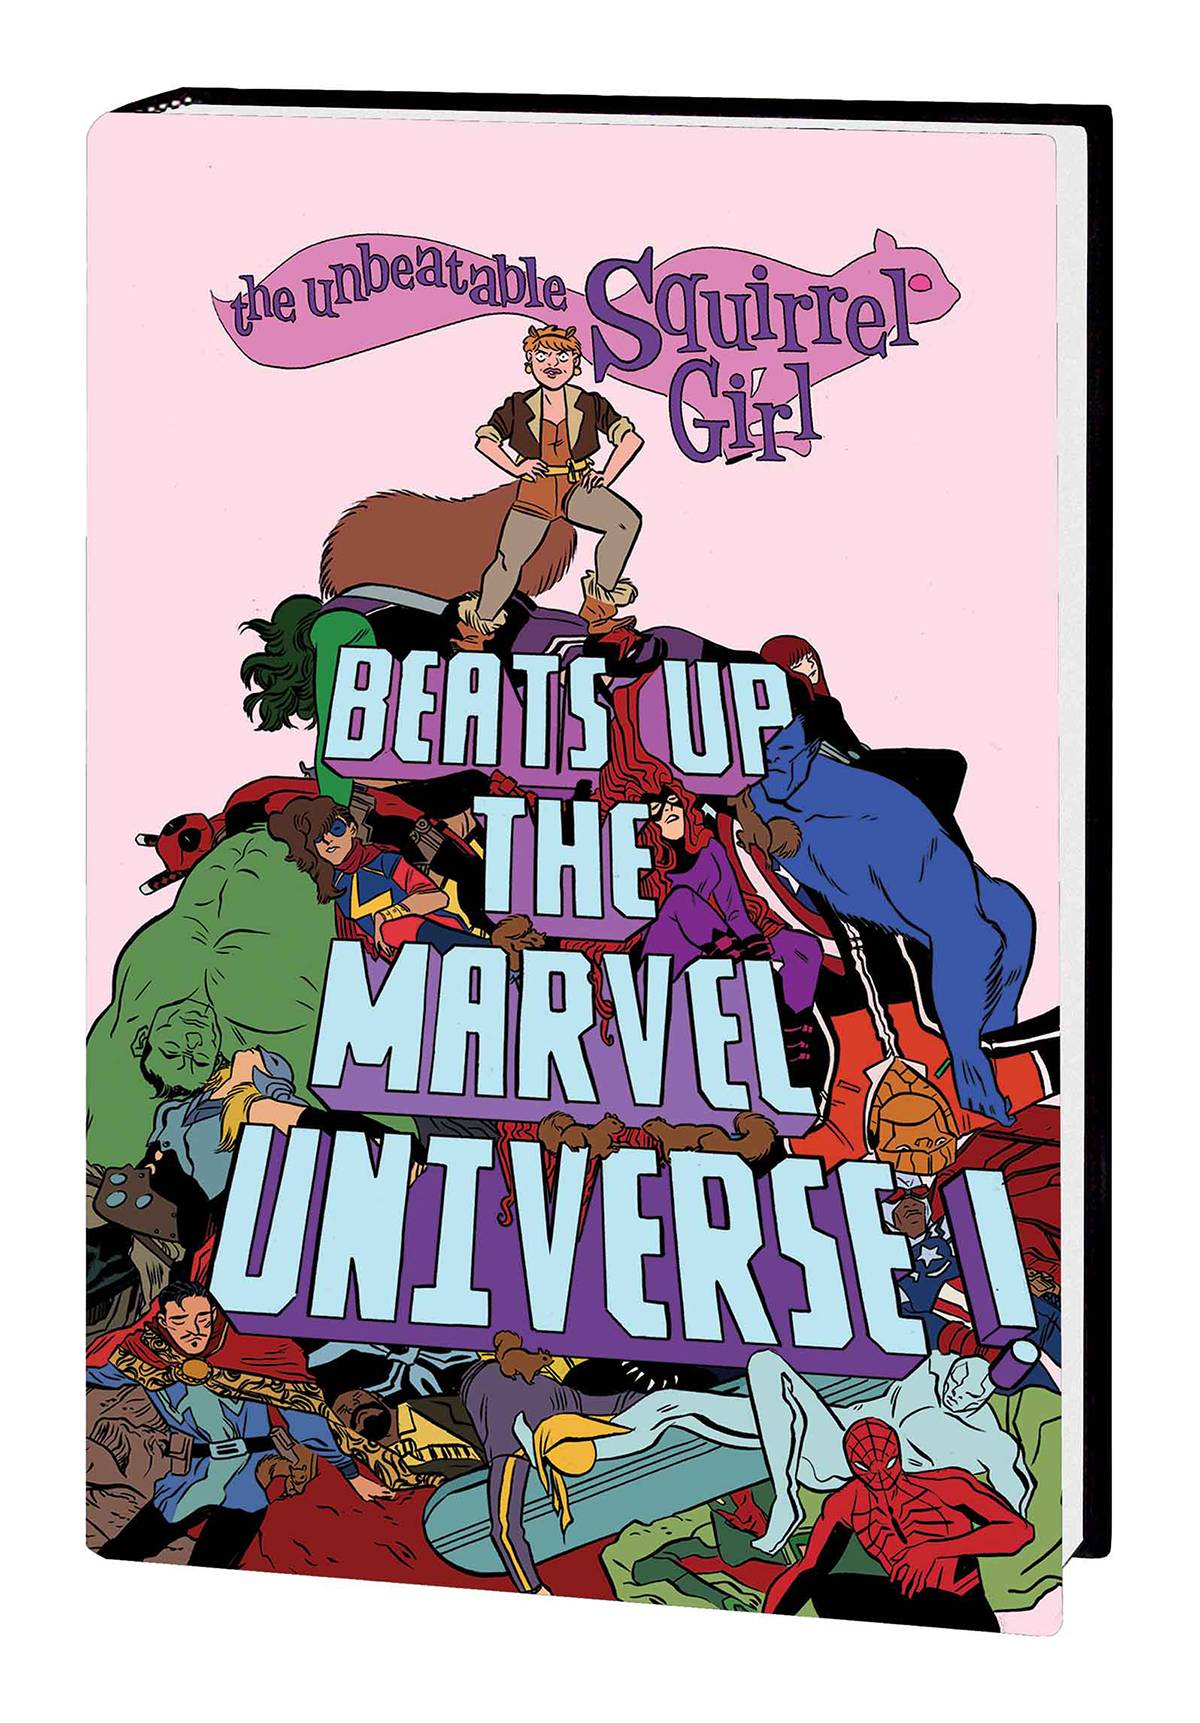 Unbeatable Squirrel Girl Beats Up Marvel Universe Graphic Novel Hardcover